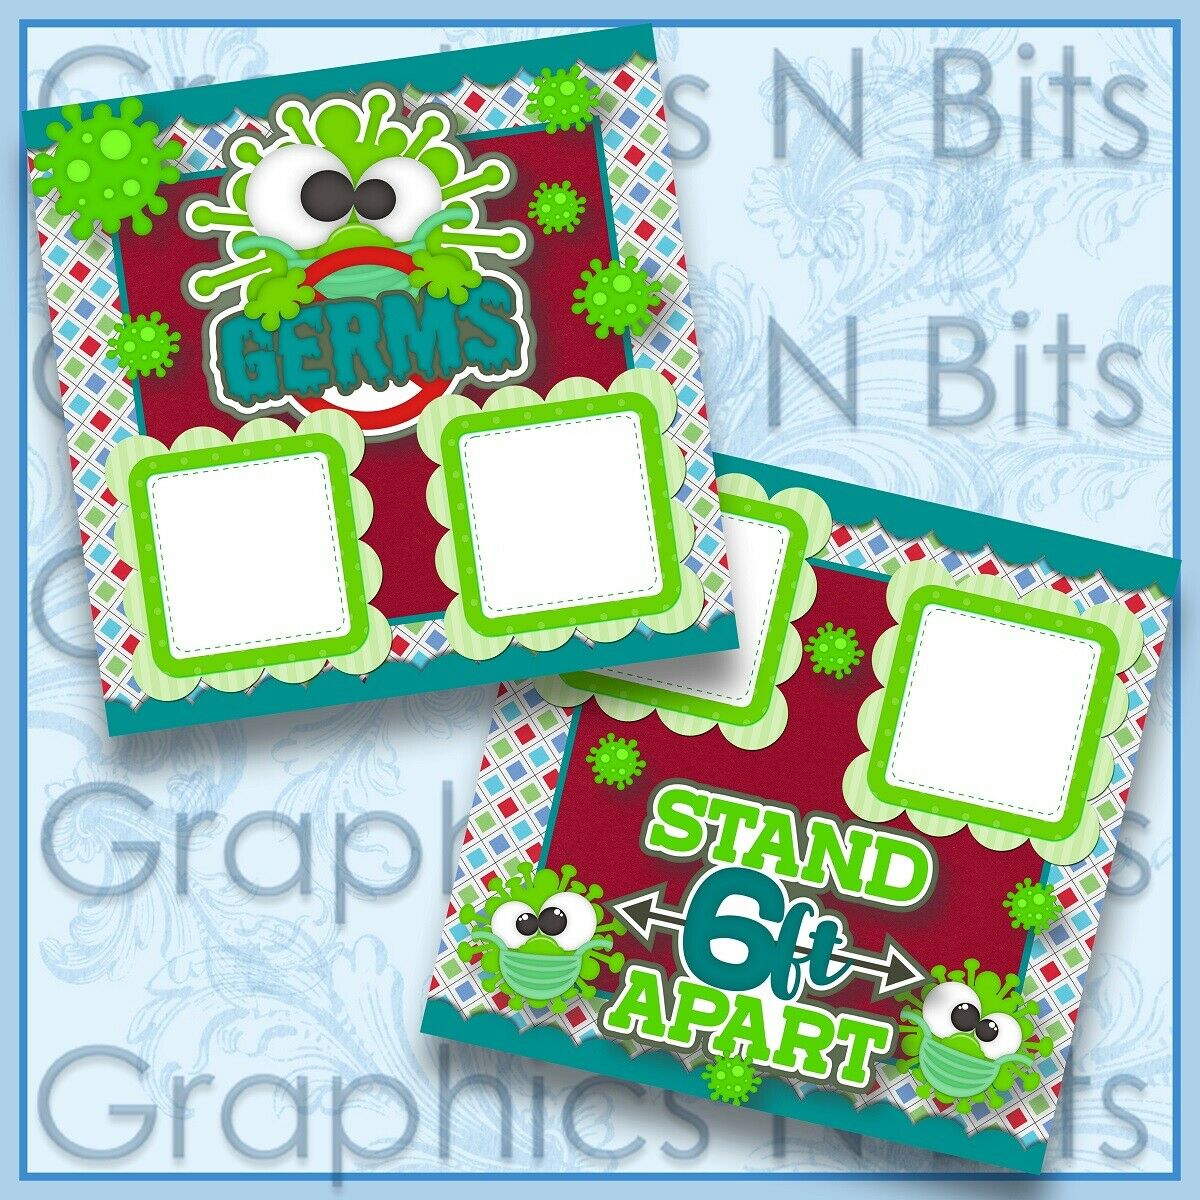 Germs 12"x12" Printed Premade Scrapbook Pages